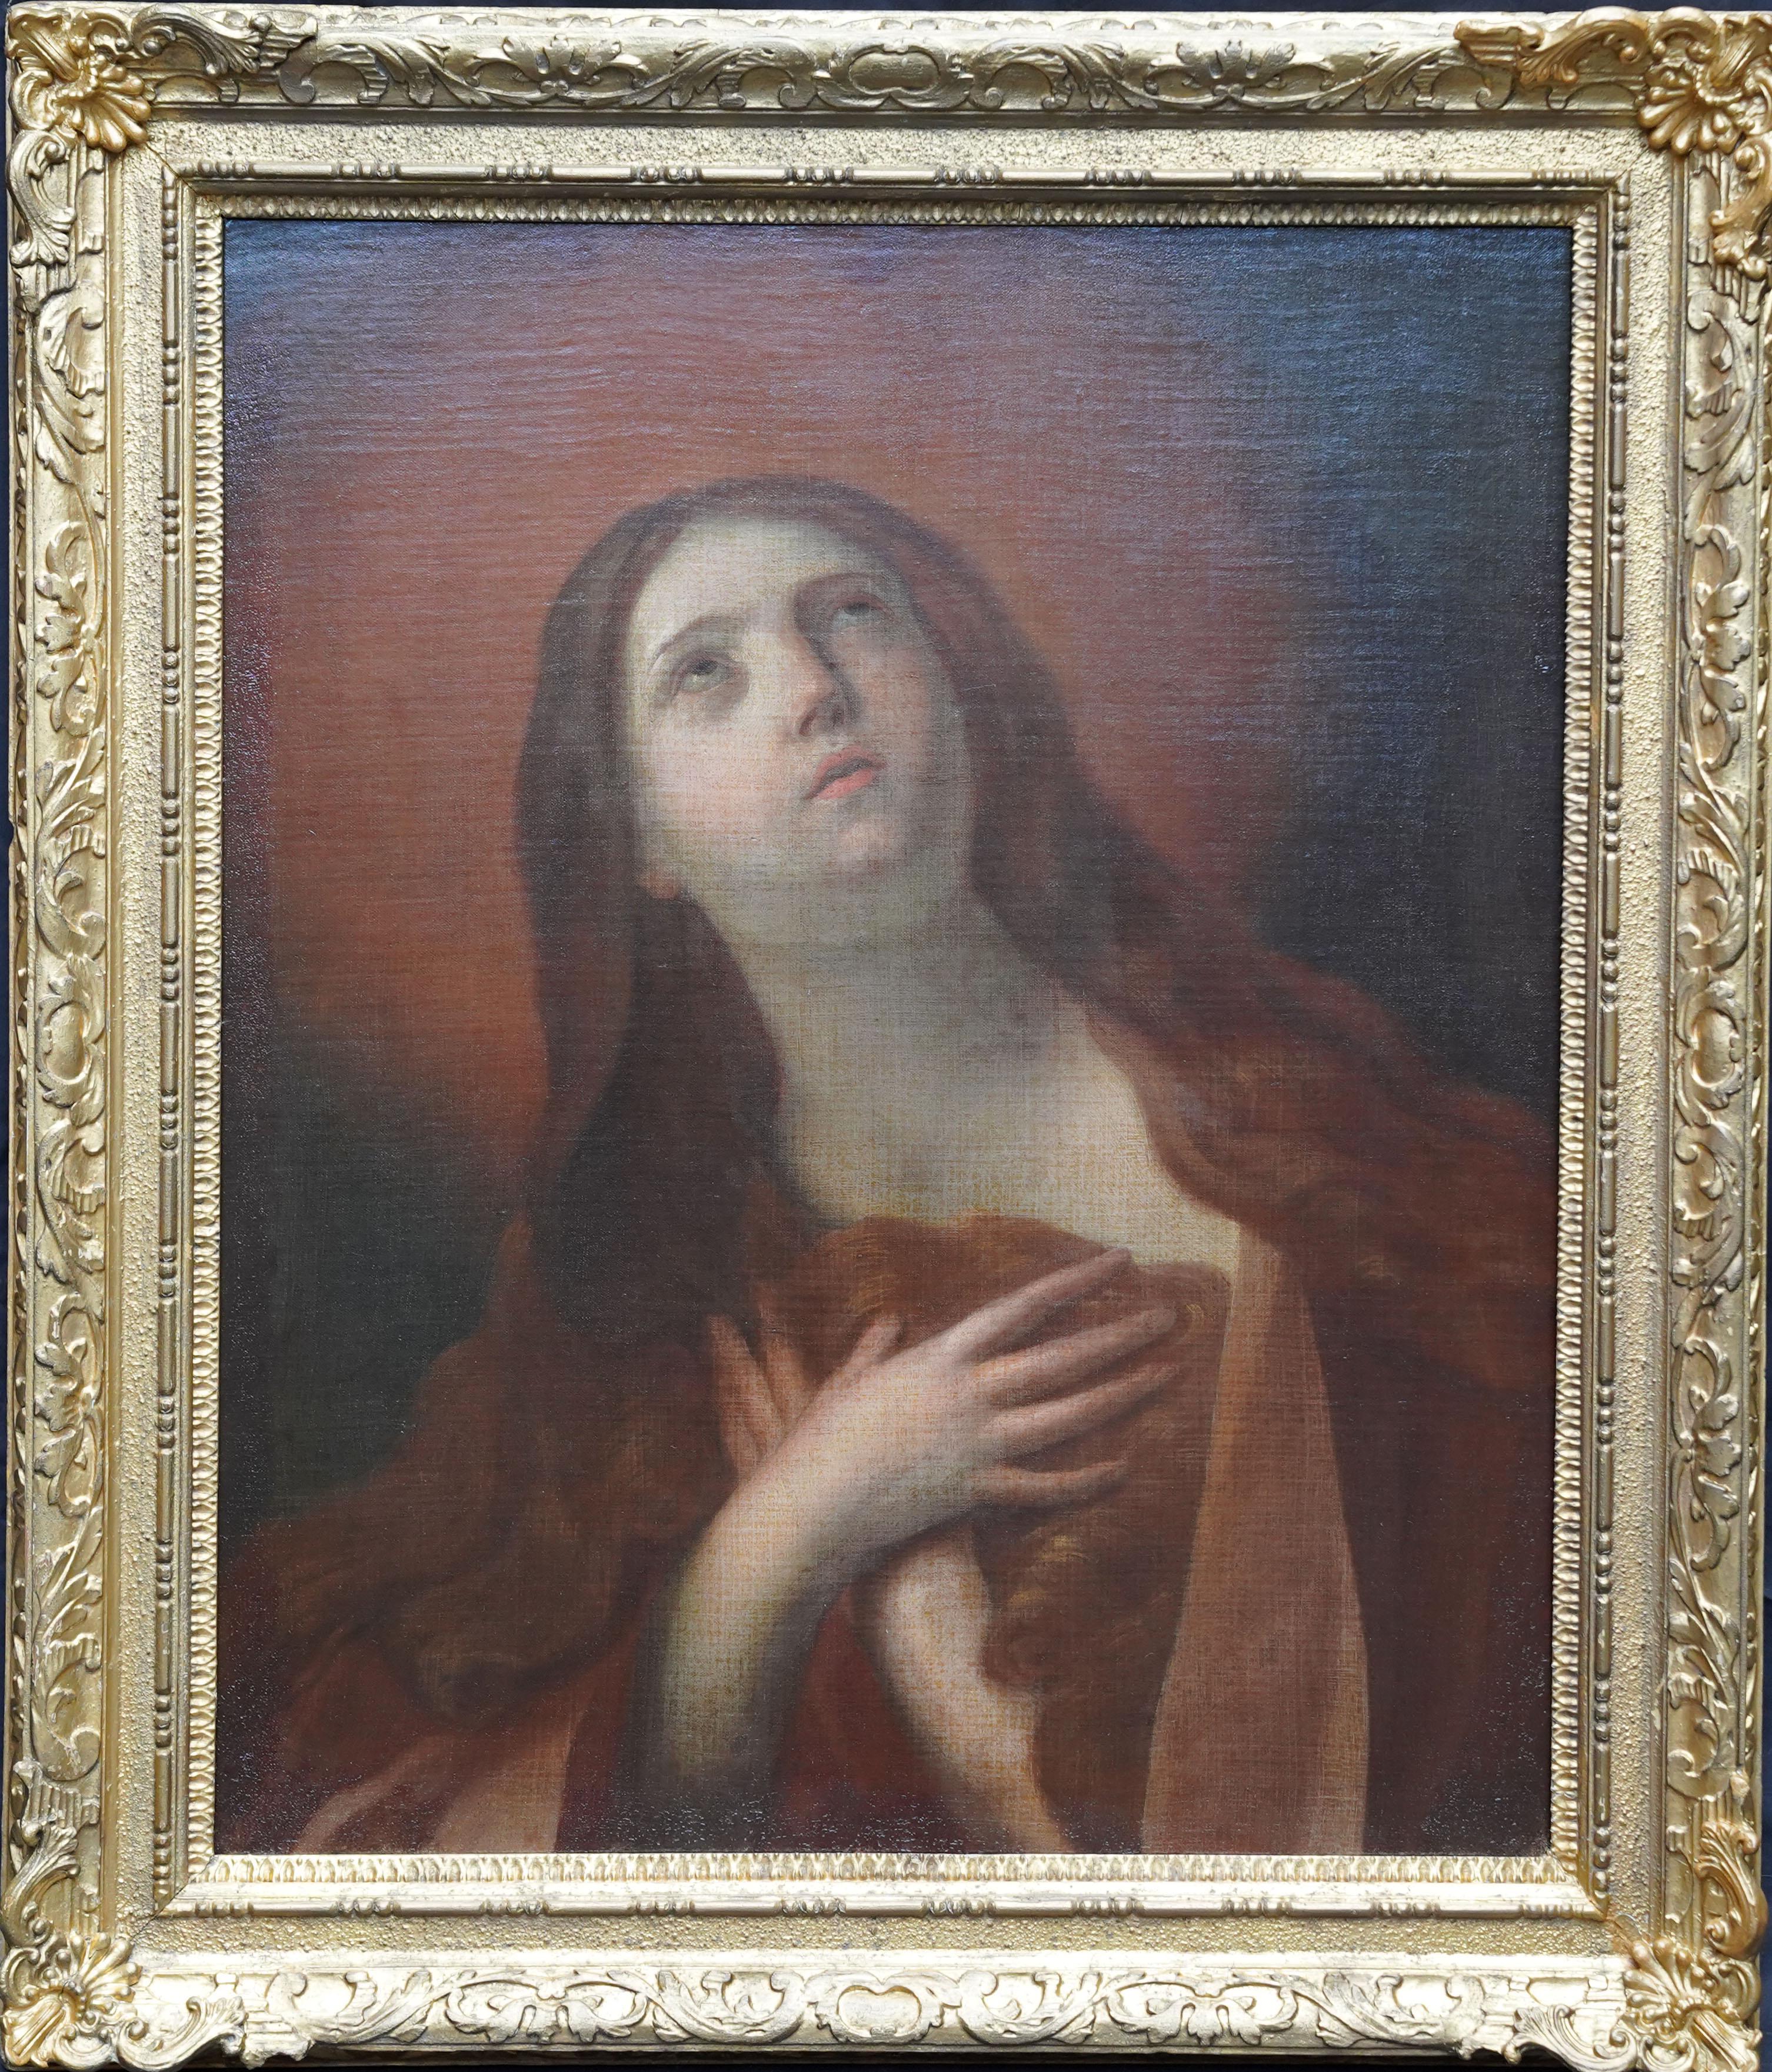 The Penitent Mary Magdalene - Old Master religious art portrait oil painting For Sale 2